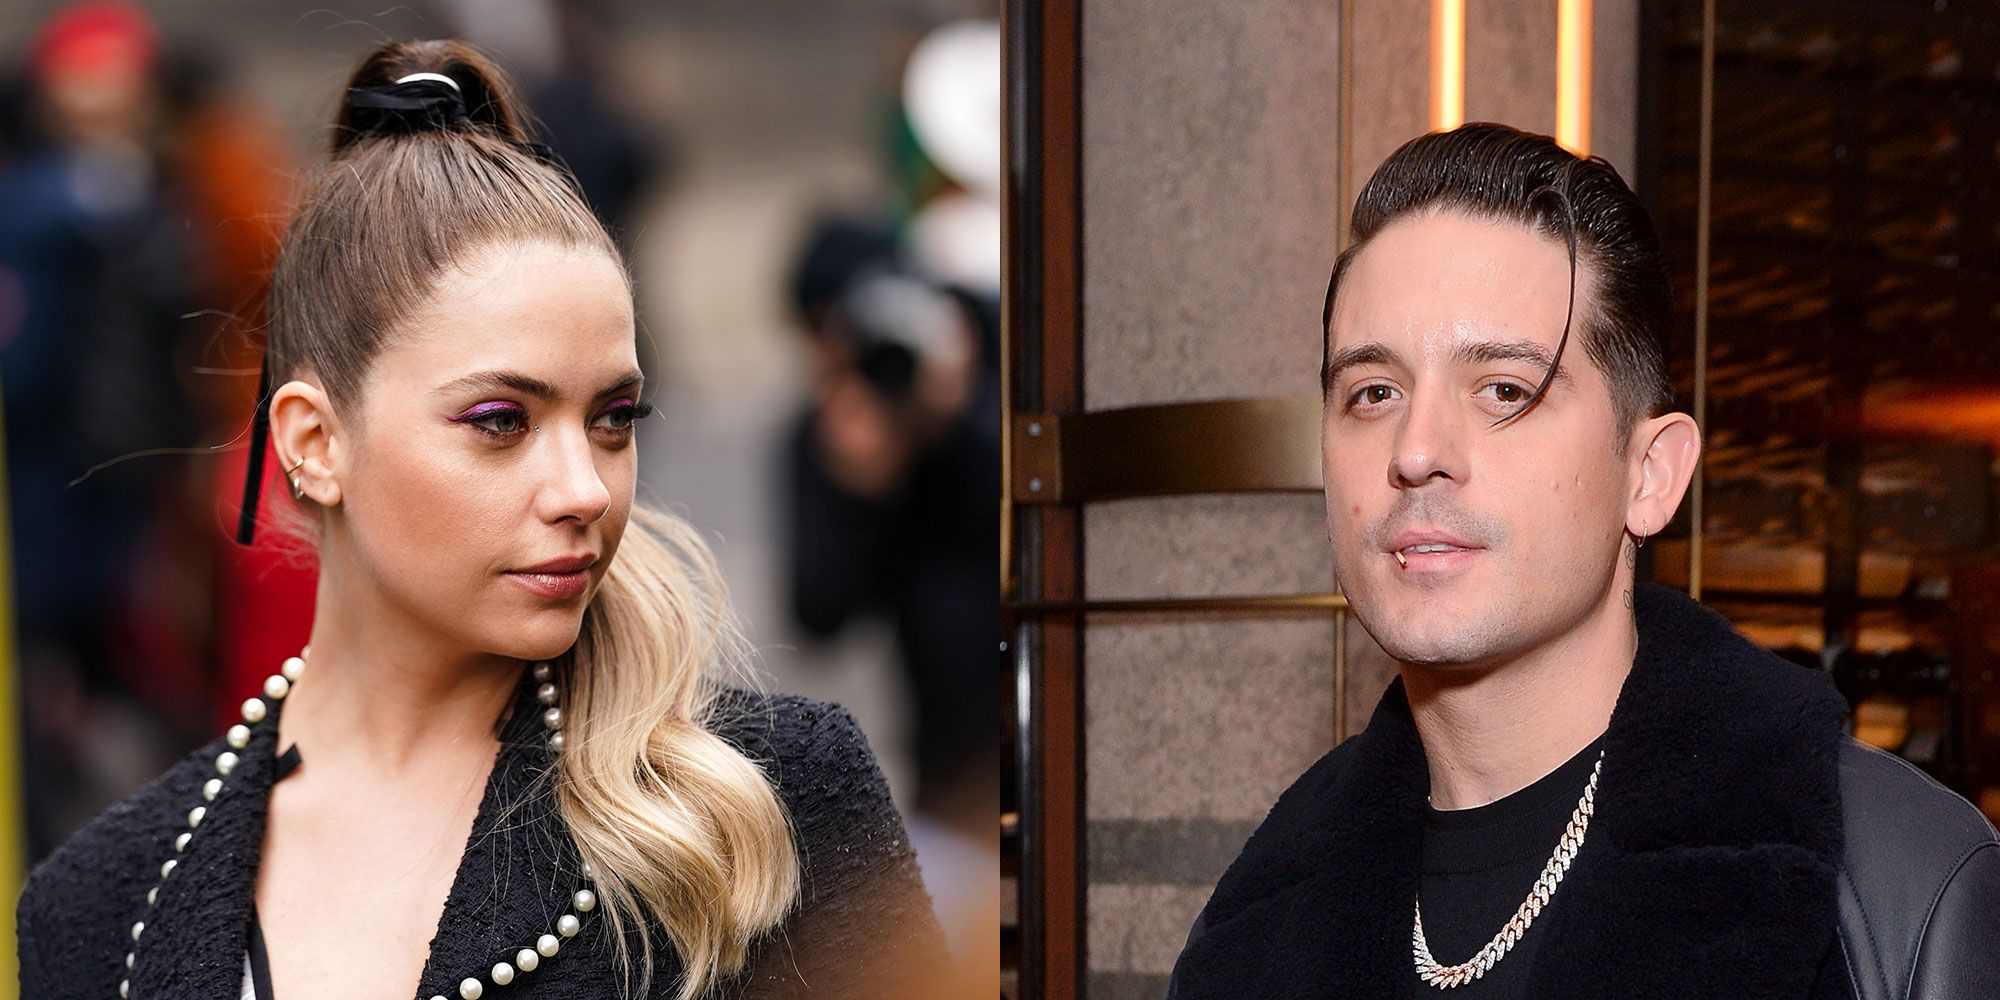 G-Eazy doesn't want to hear Halsey's music